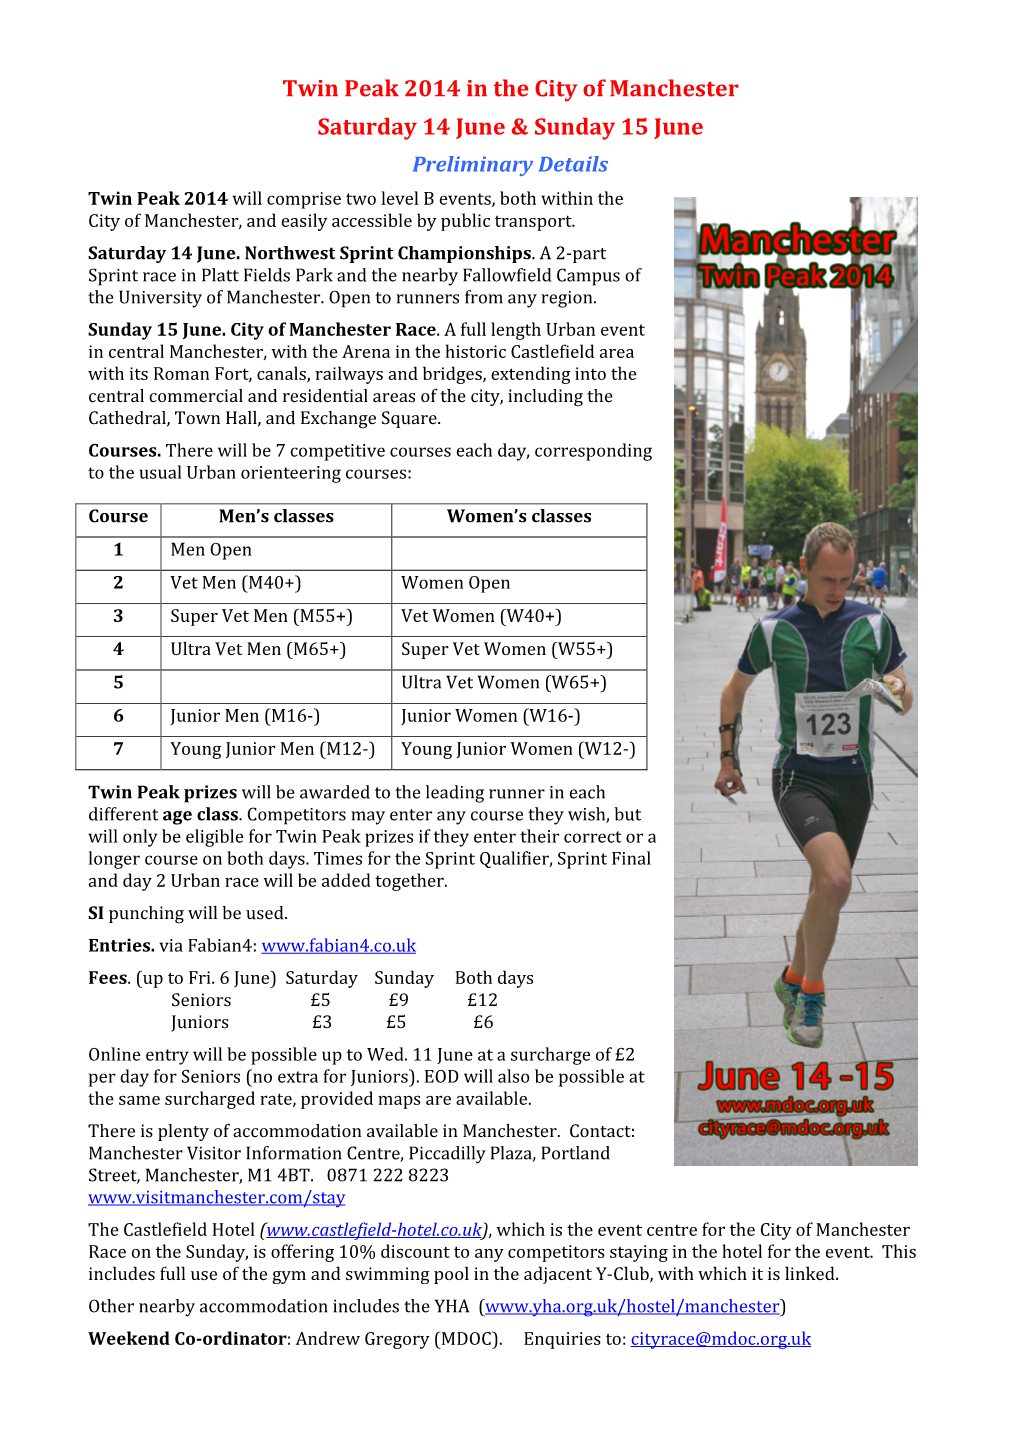 Twin Peak 2014 in the City of Manchester Saturday 14 June